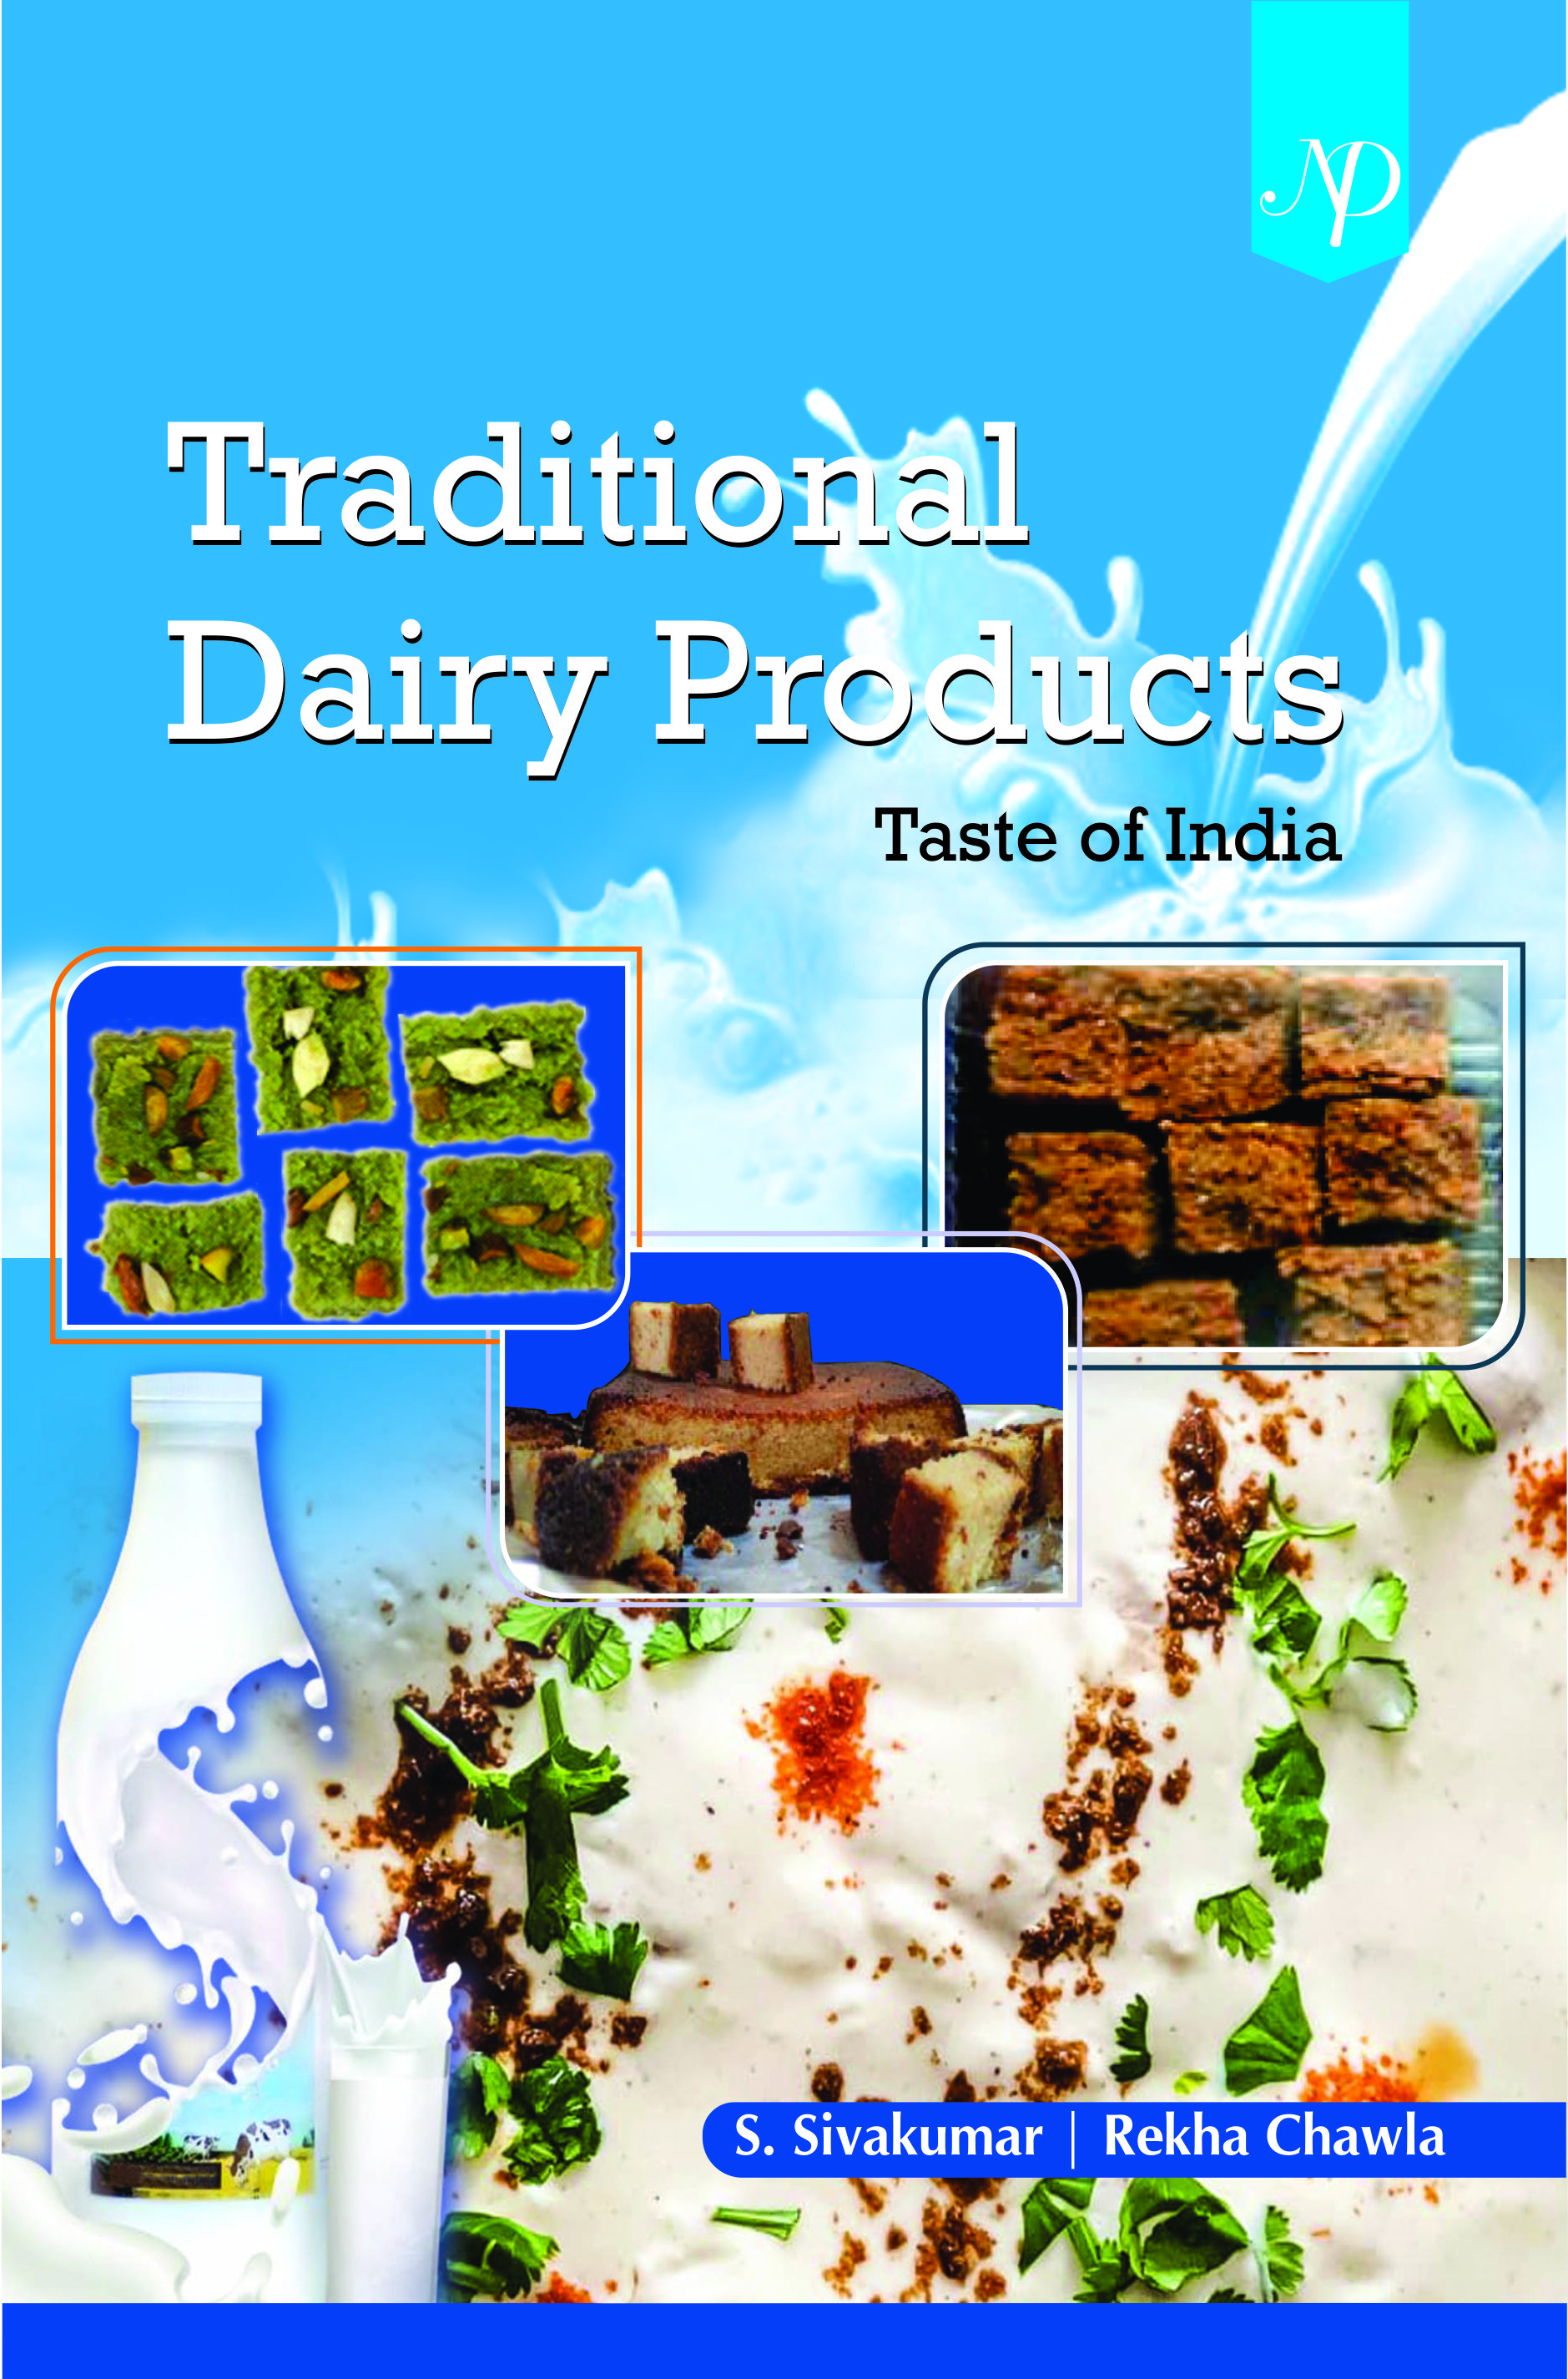 Traditional Dairy Products-Taste of India